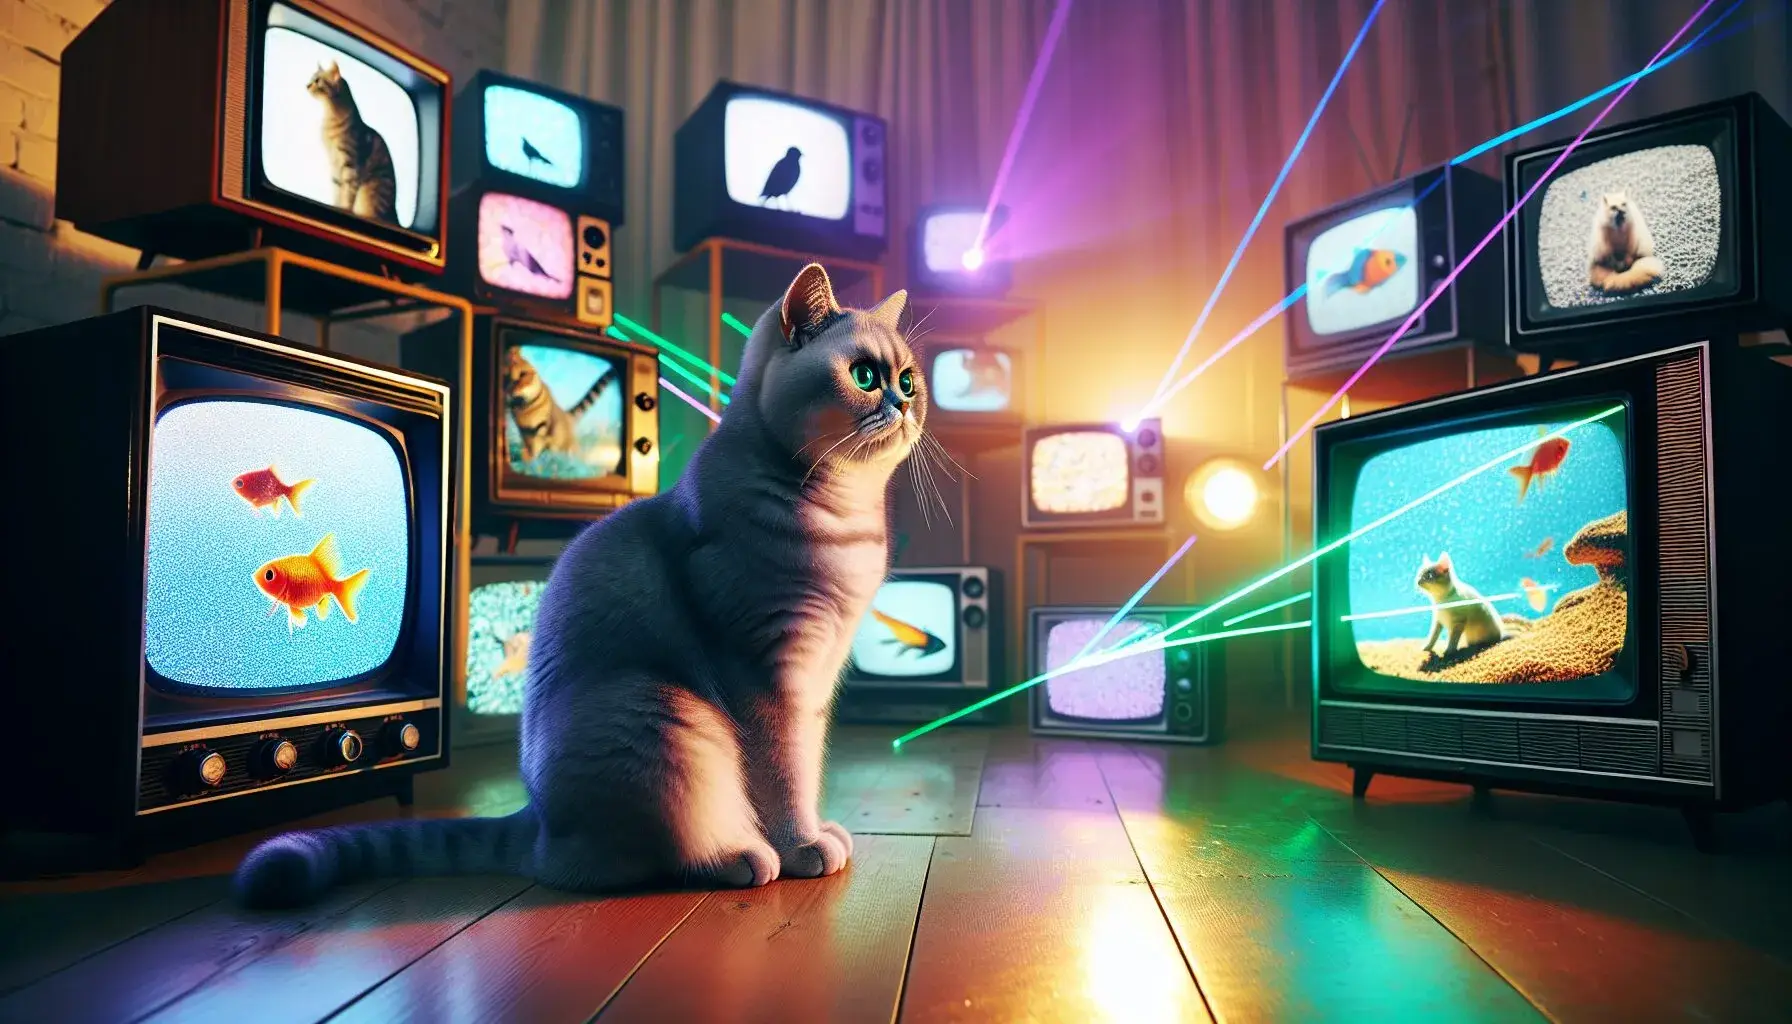 An illustration of a cat exploring different TV channels